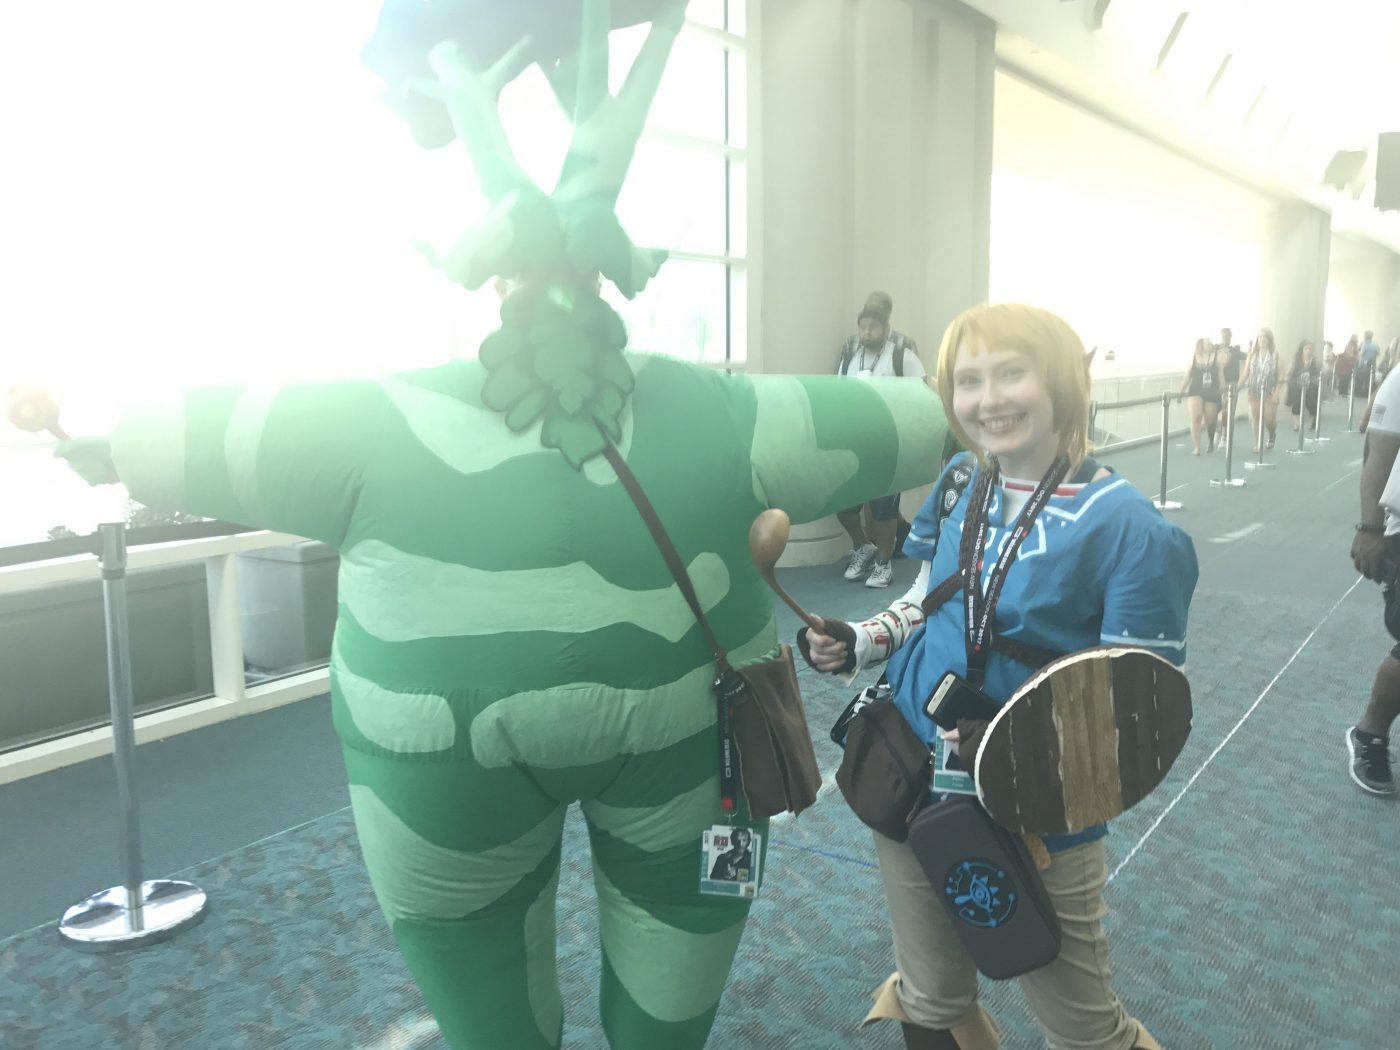 SDCC 2017: Who wore it best? Link cosplay